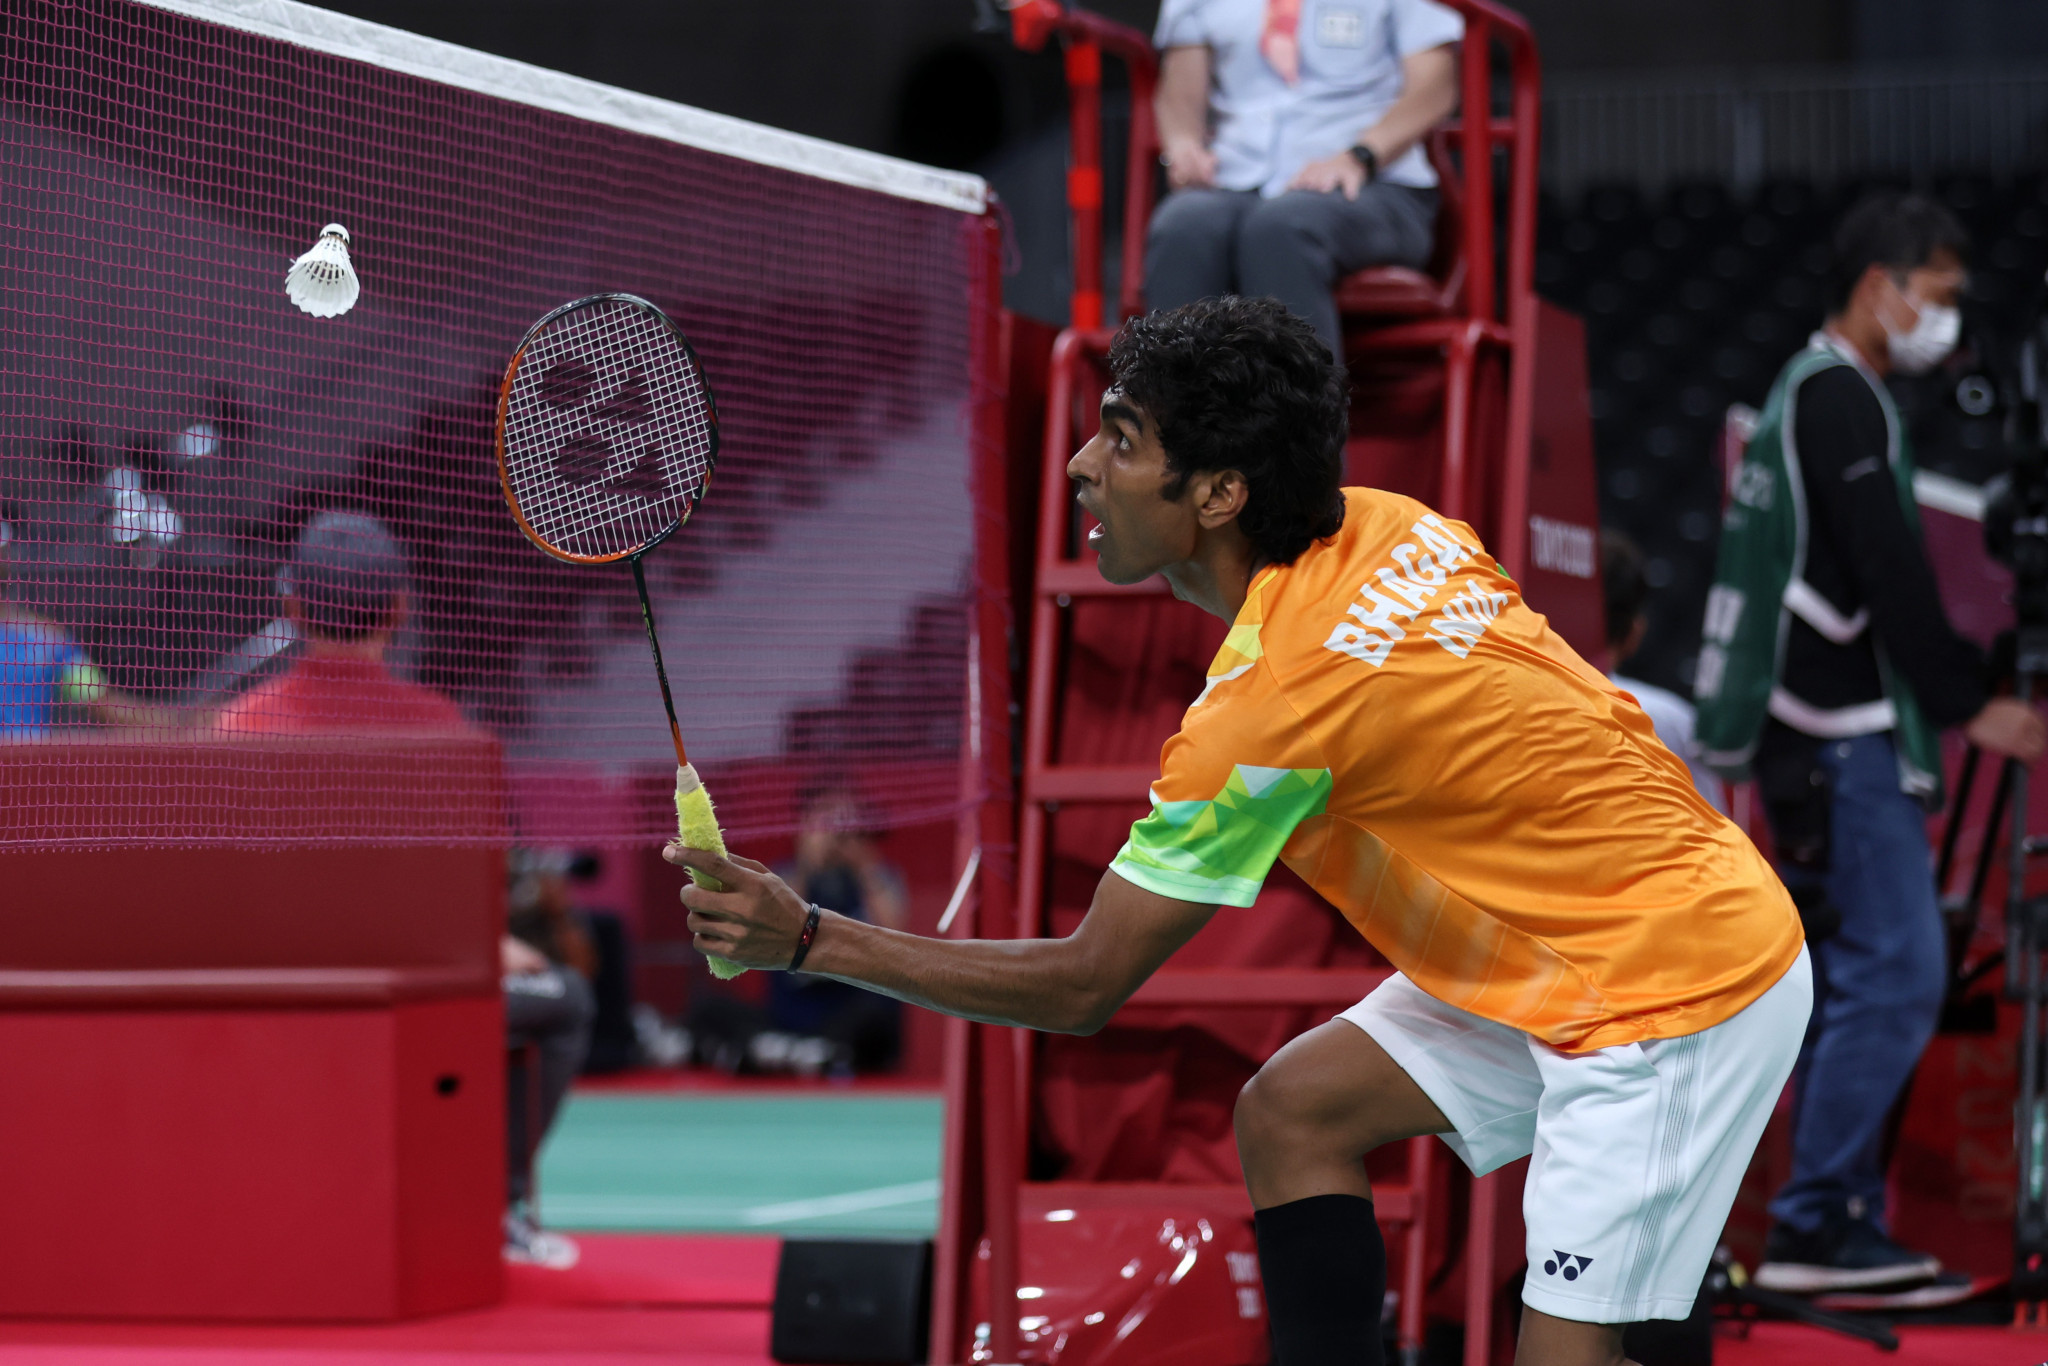 Pramod Bhagat was one of two badminton gold medallists for India at the Tokyo 2020 Paralympics ©Getty Images